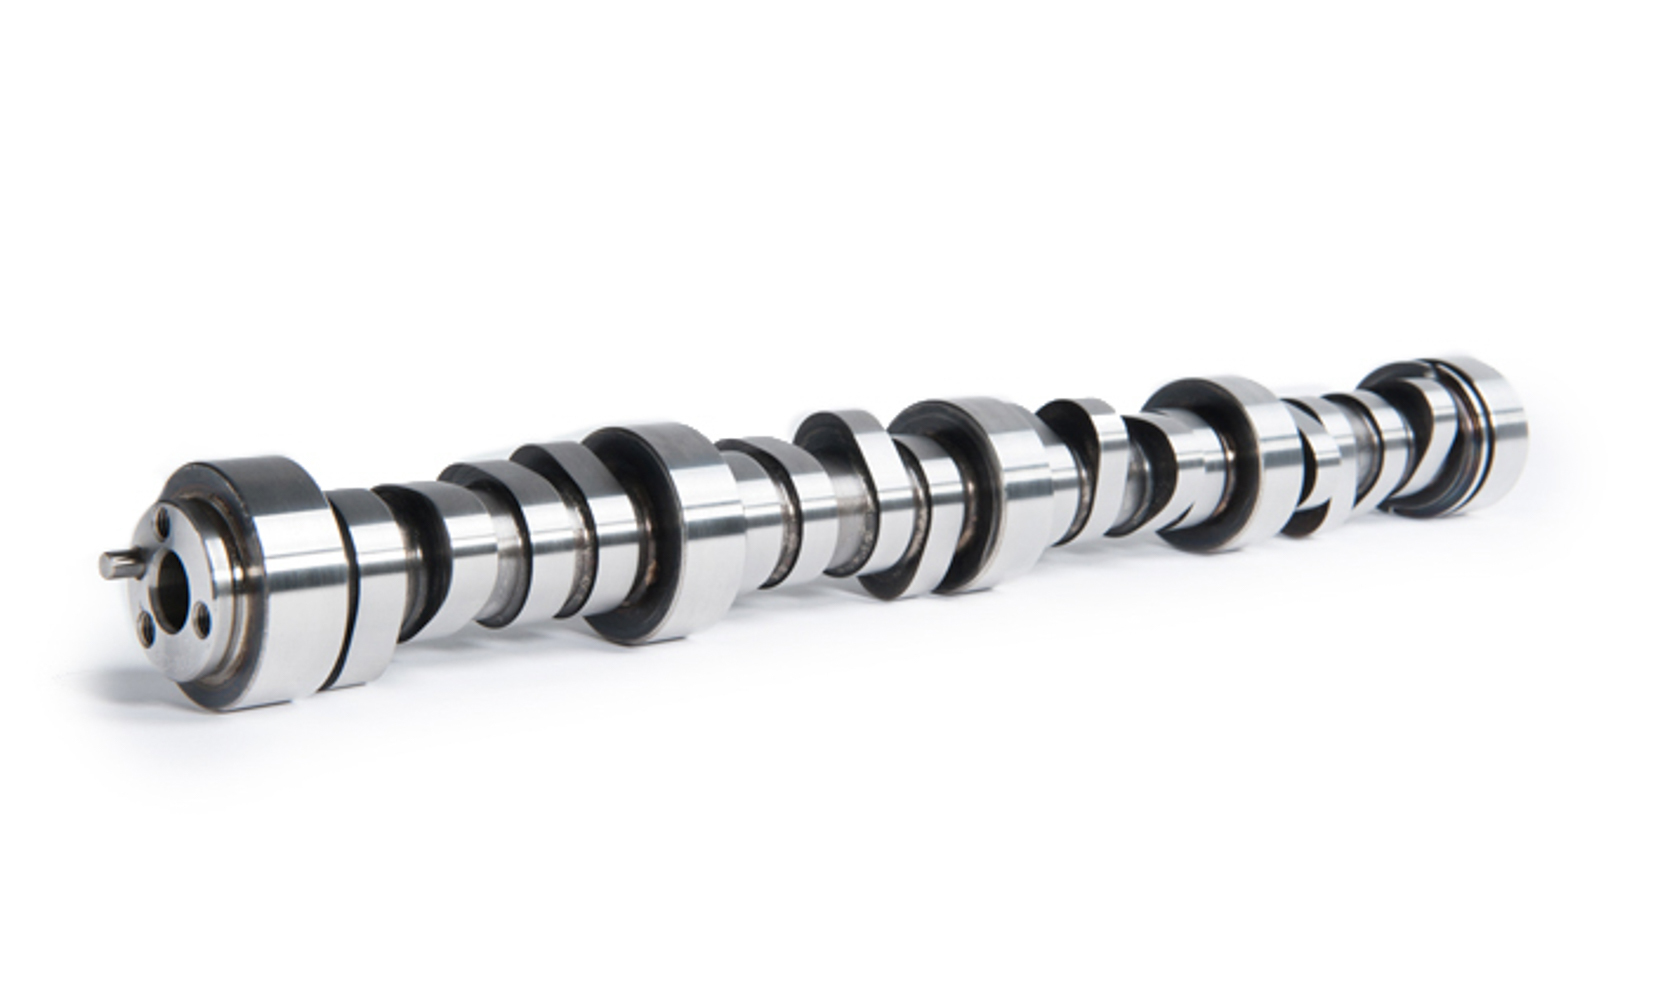 Cam Motion 03-01-0053 Camshaft, Supercharger, Hydraulic Roller, Lift 0.595 / 0.587 in, Duration 224 / 238, 118 LSA, 3500 / 6800 RPM, GM LS-Series, Each